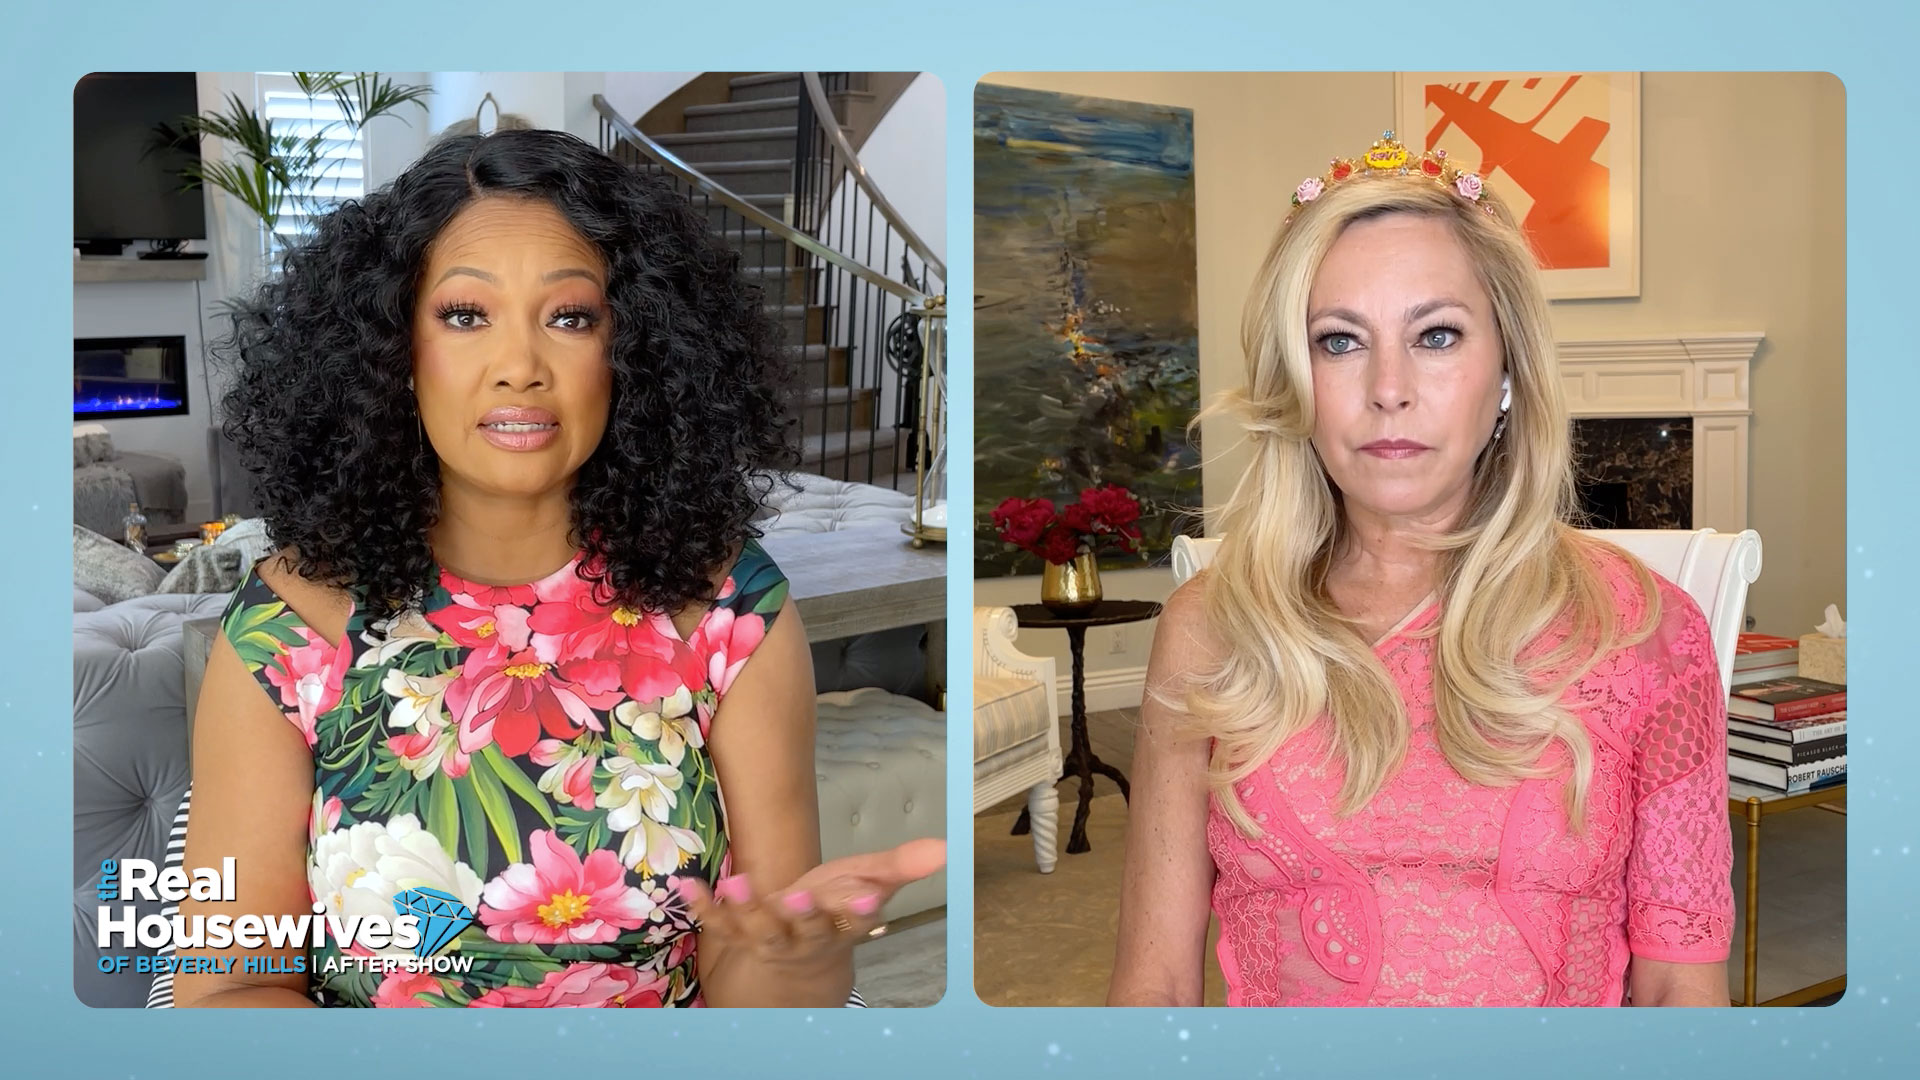 Garcelle Beauvais Can Relate to Erika Girardi's Public Divorce: "It's Horrible"